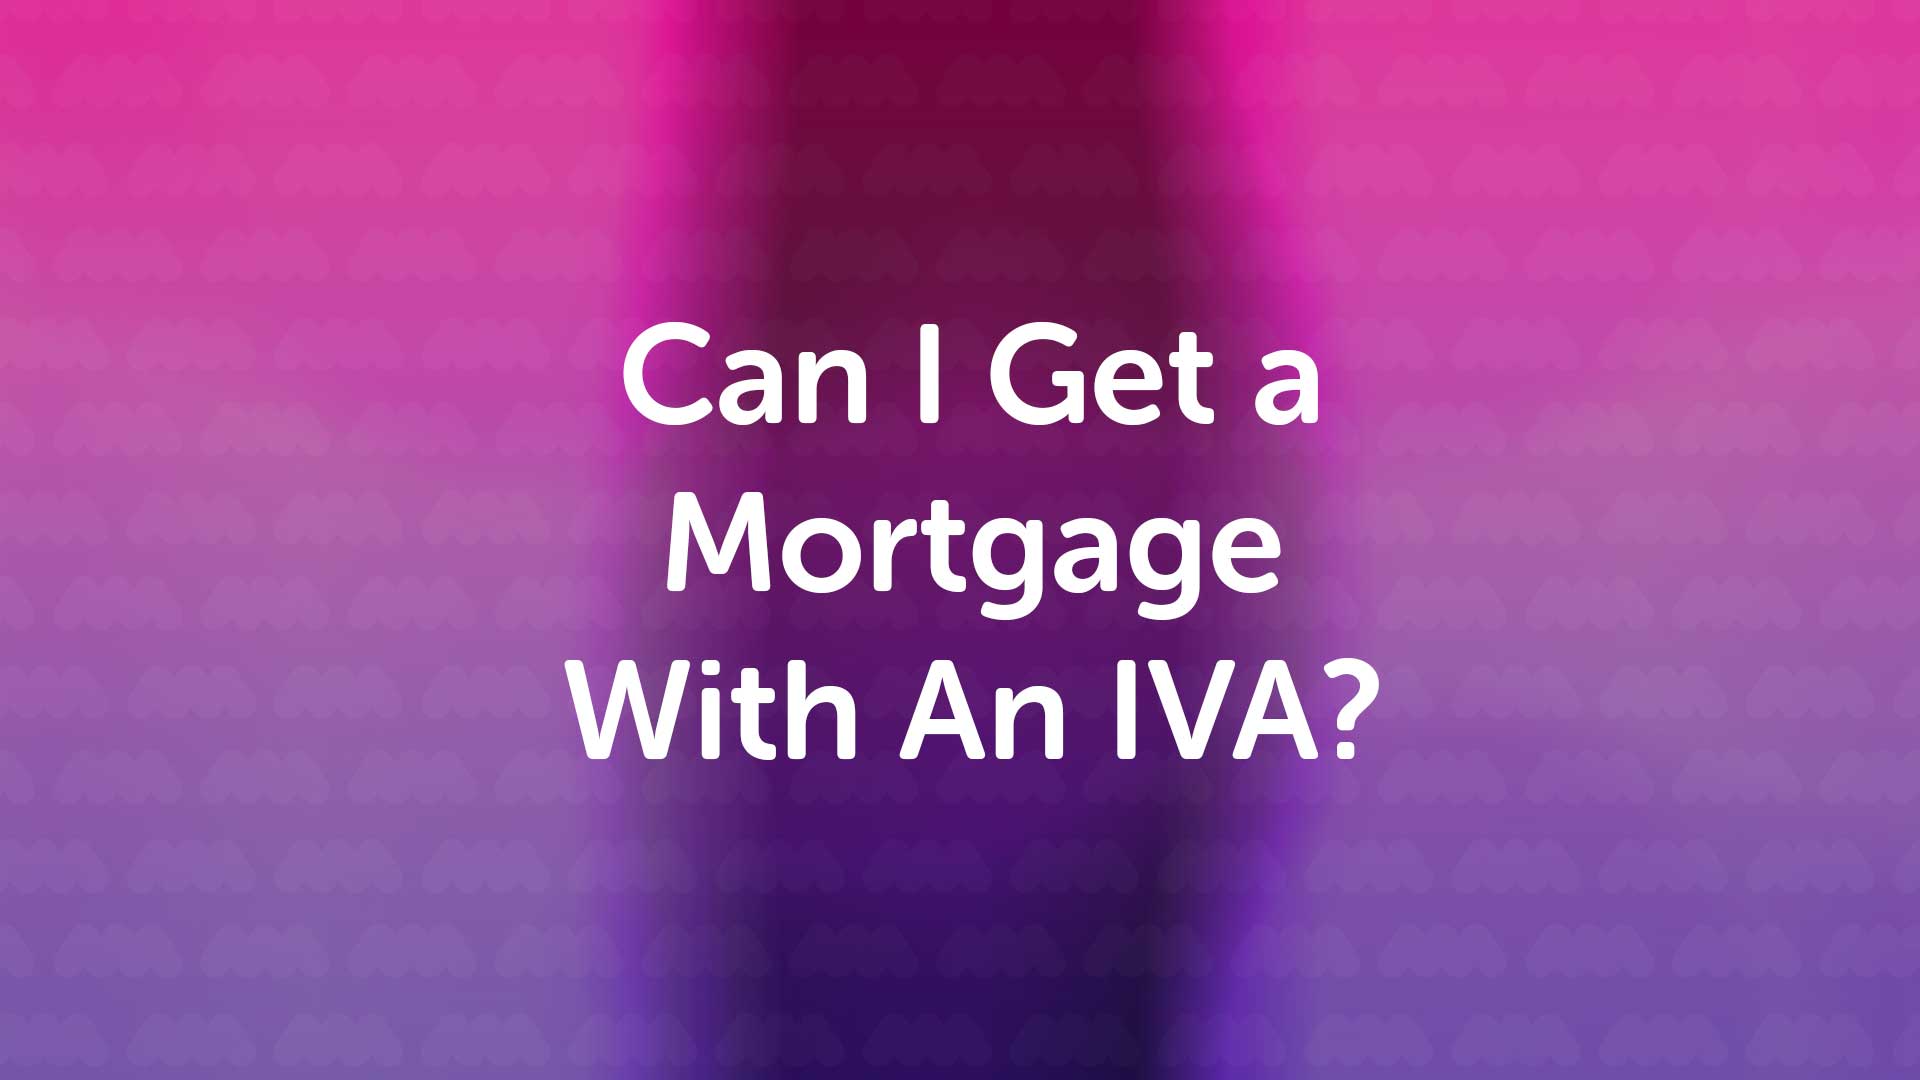 Can I Get a Mortgage in Harrogate with an IVA?